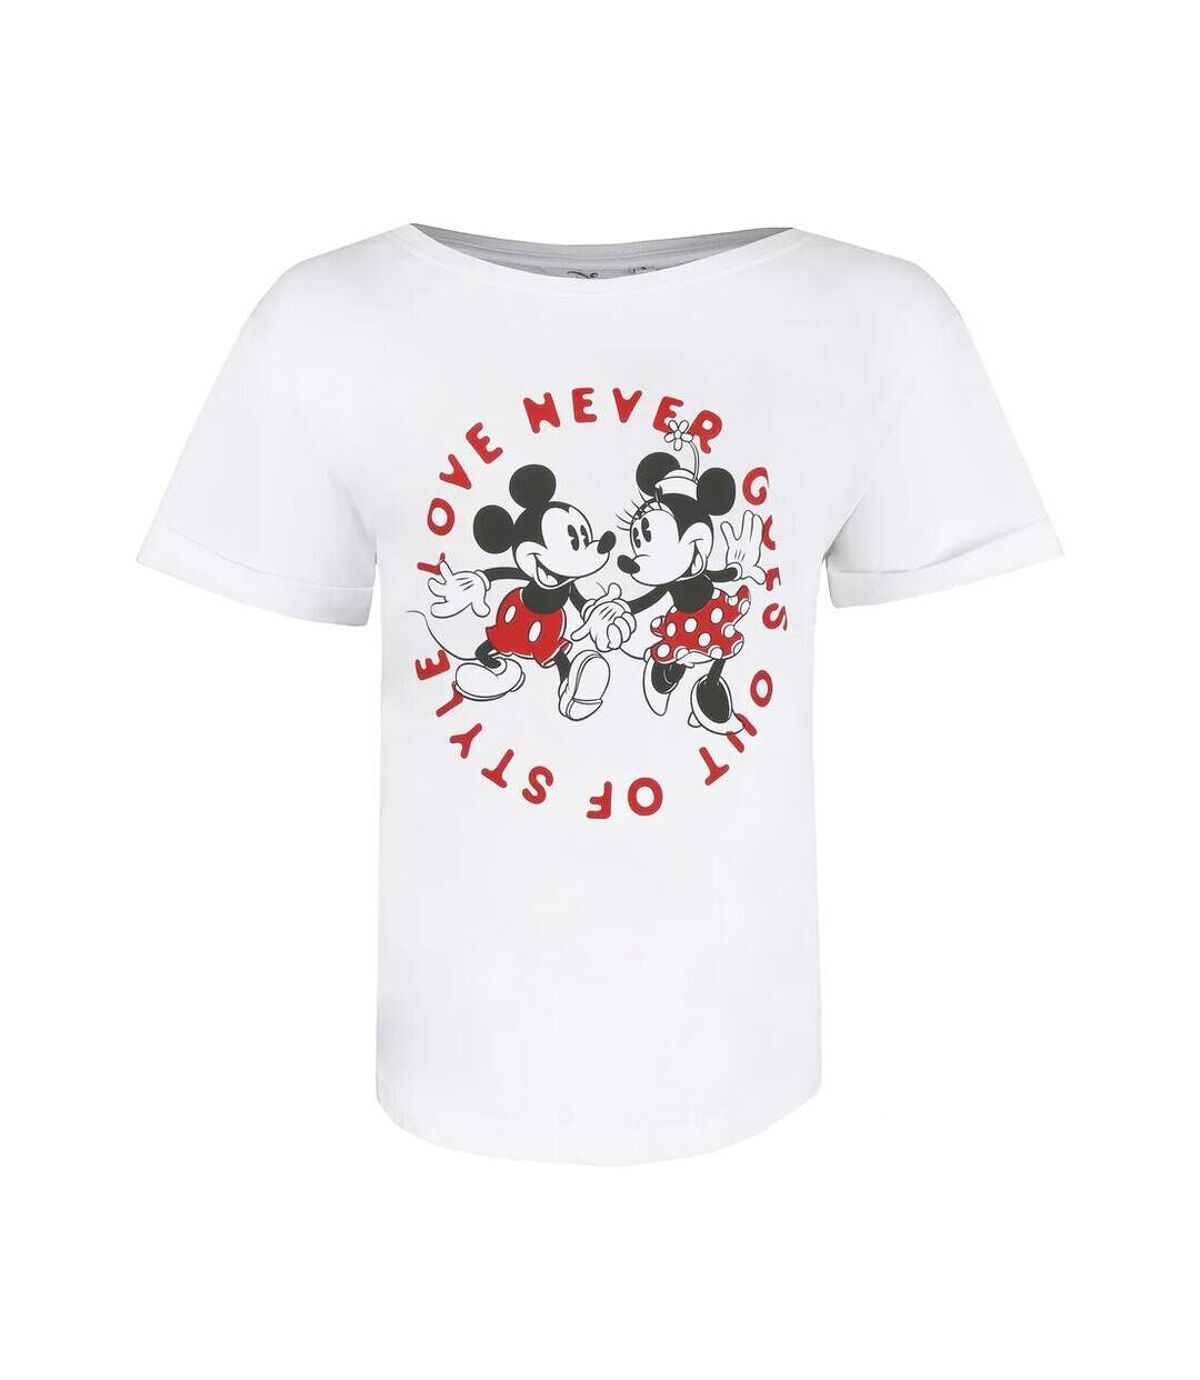 Disney - T-shirt LOVE NEVER GOES OUT OF STYLE - Femme (Blanc) - UTTV998